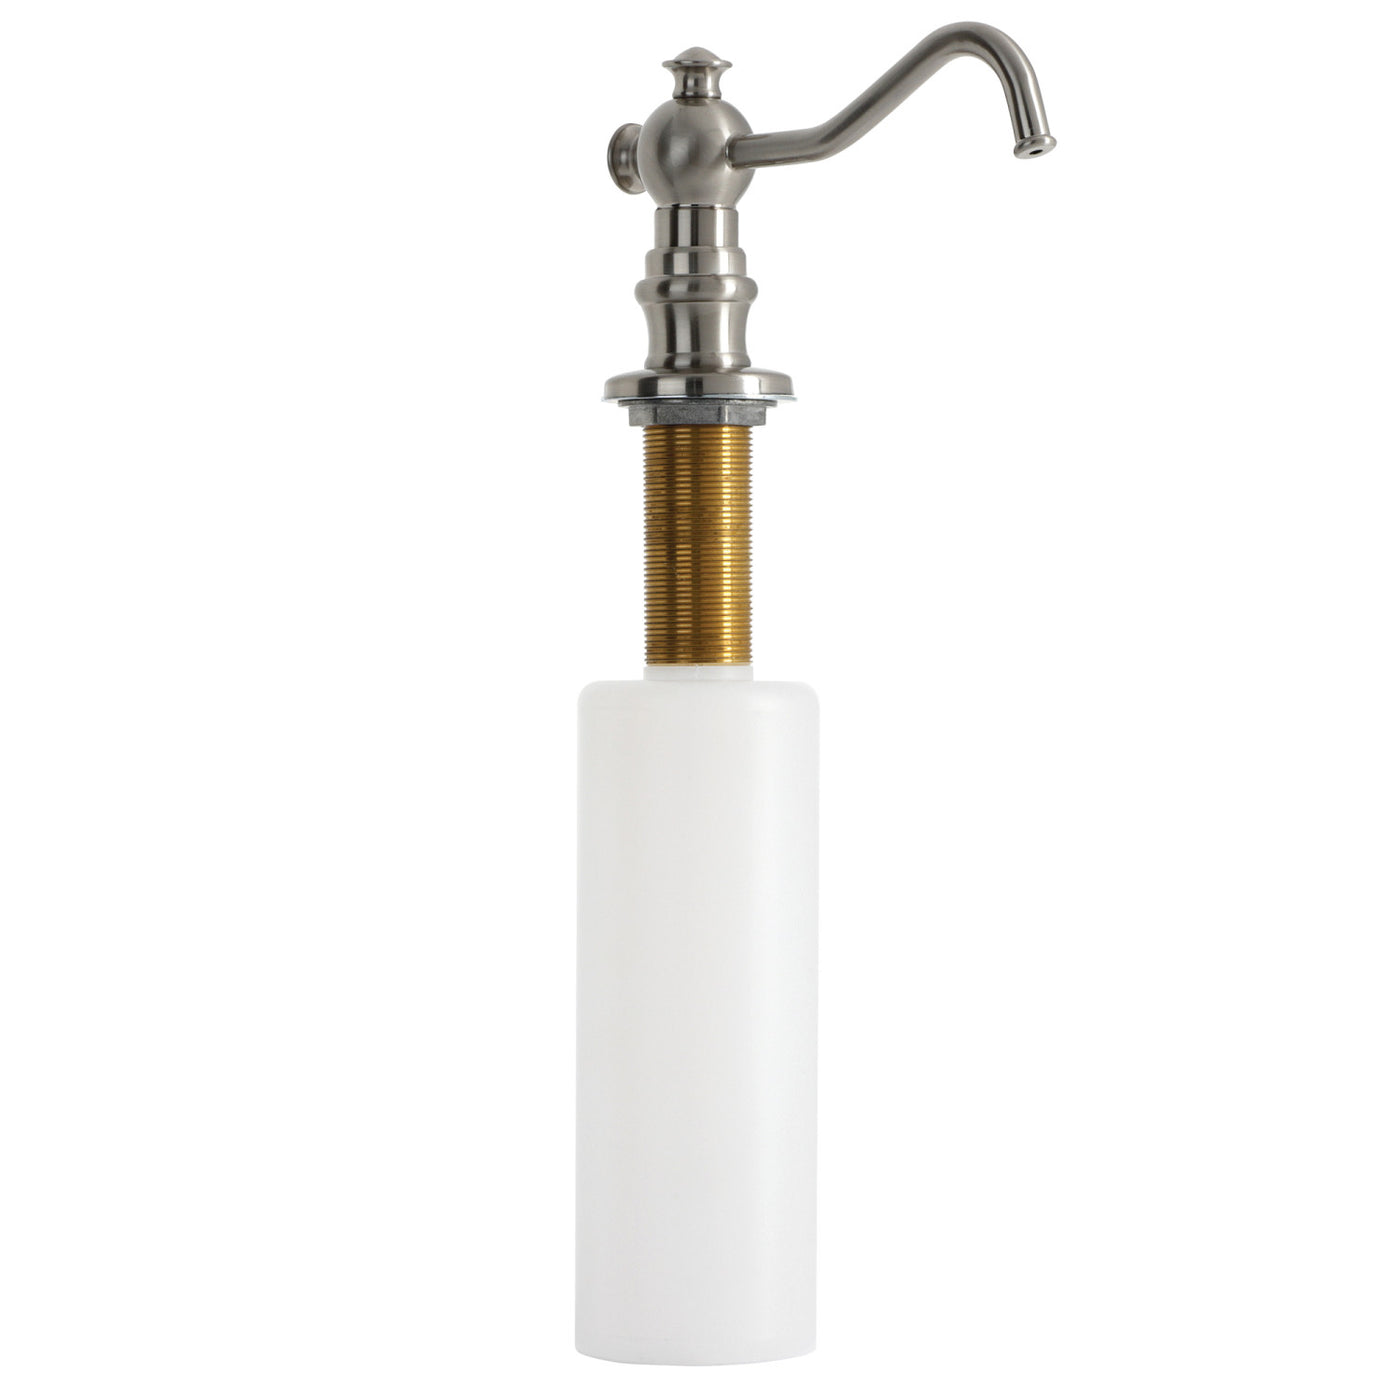 Elements of Design ESD7608 Curved Nozzle Metal Soap Dispenser, Brushed Nickel